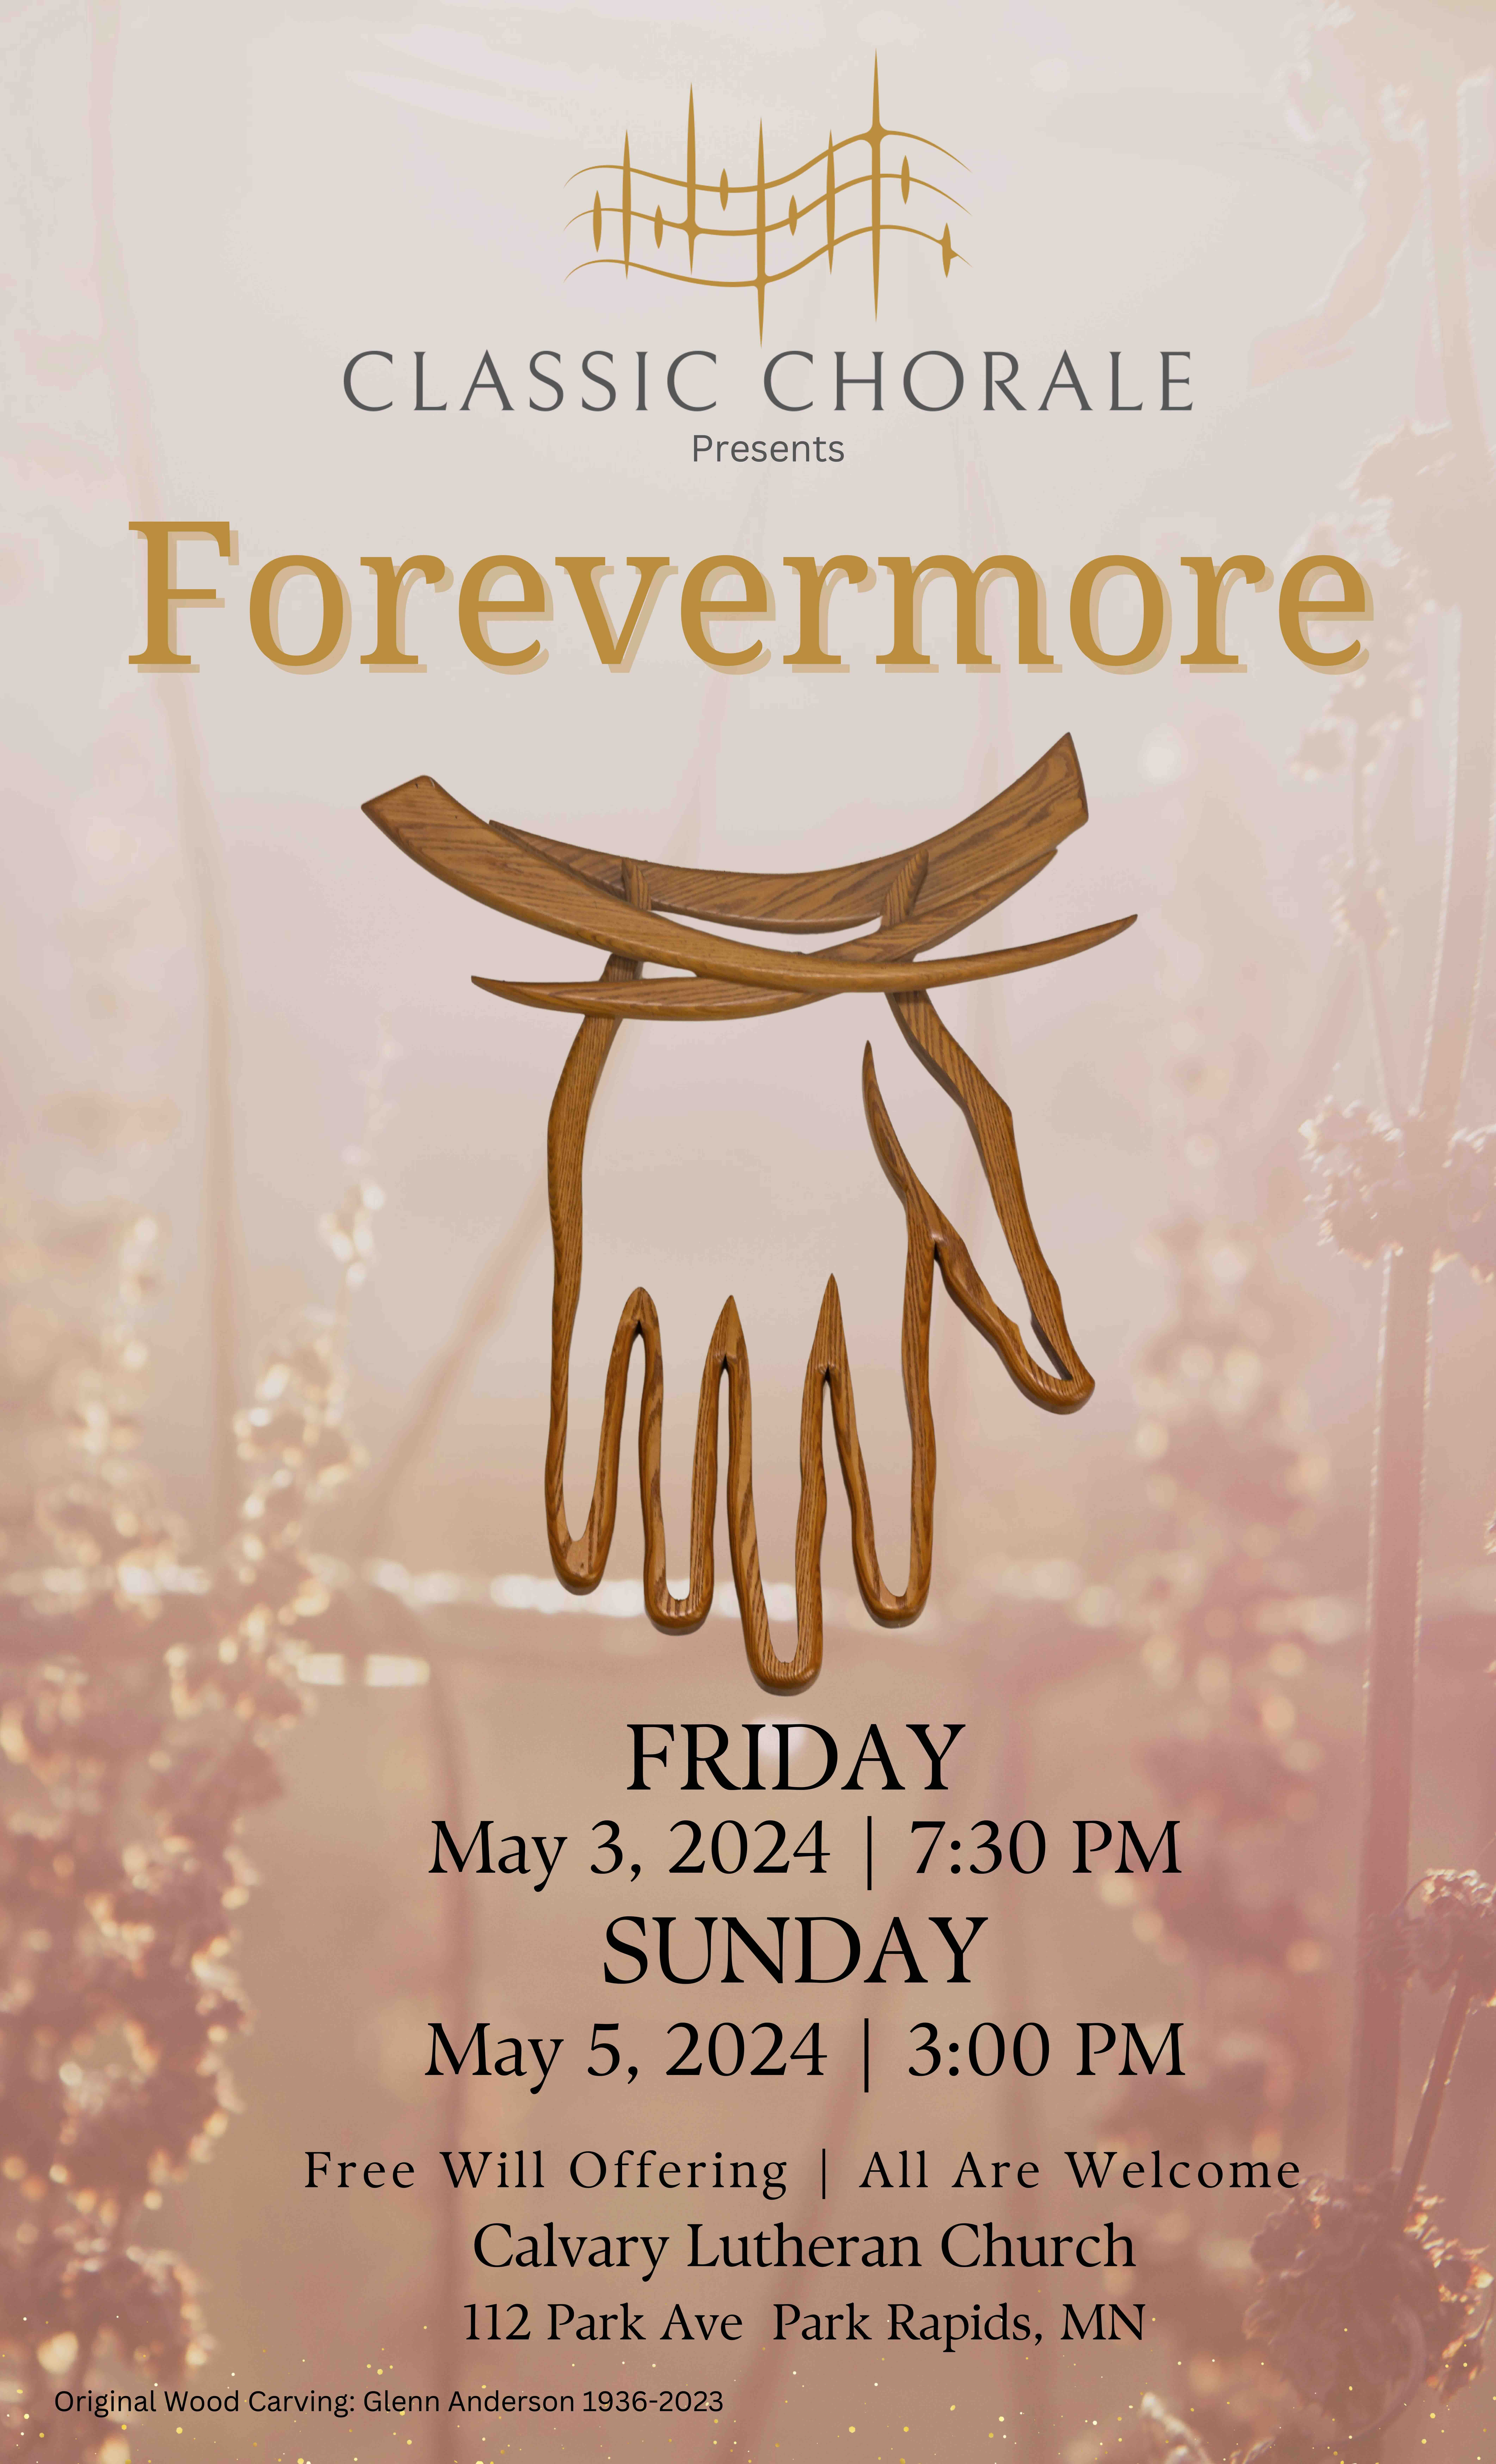 Forevermore - Classic Chorale concert